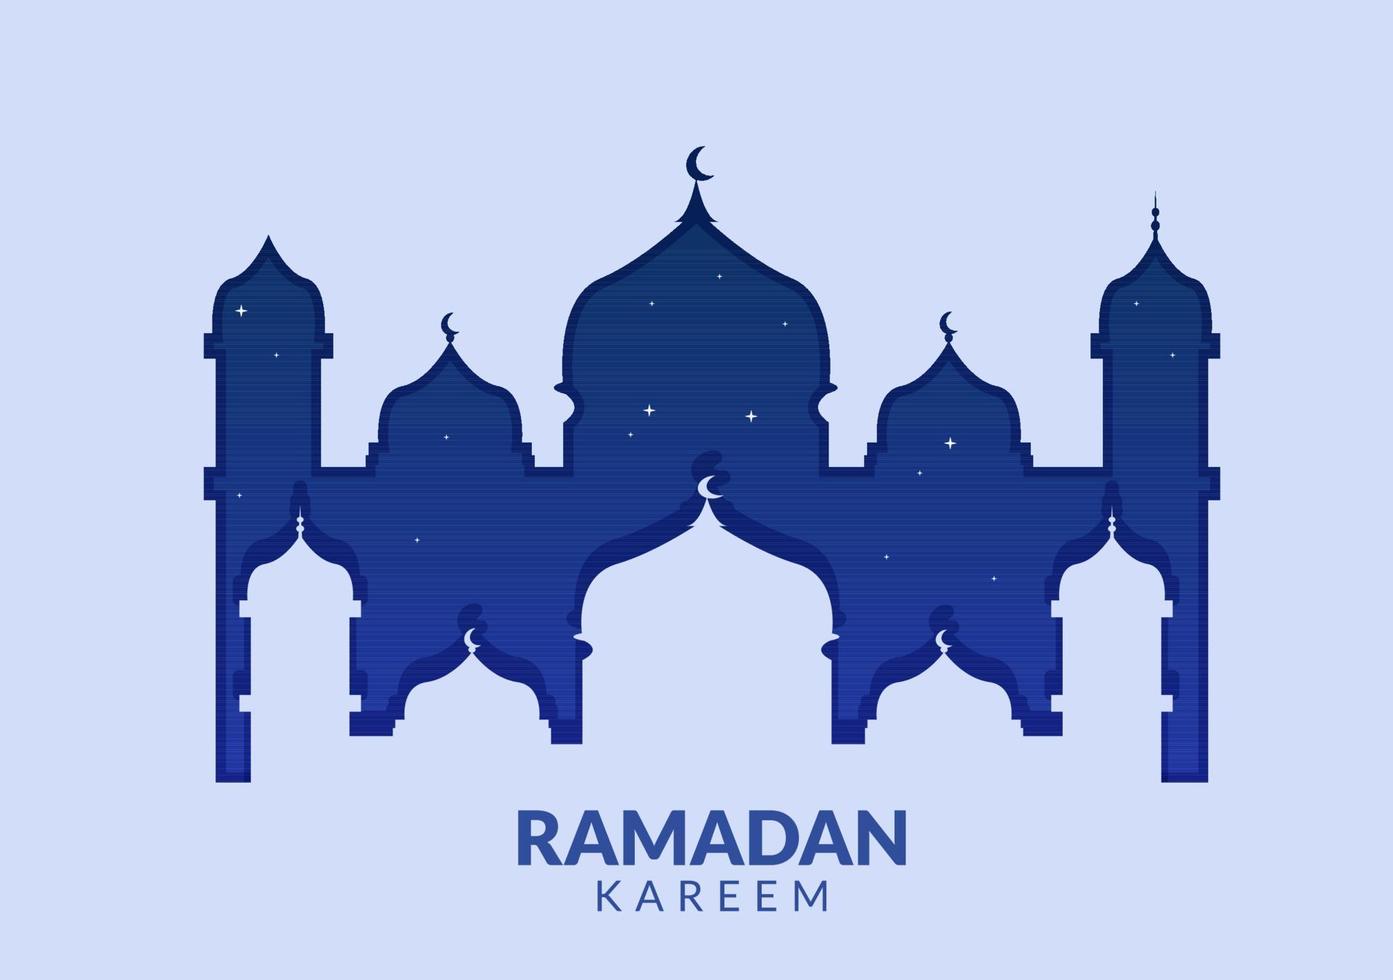 Ramadan Kareem with Mosque, Lanterns and Moon in Flat Background Vector Illustration for Religious Holiday Islamic Eid Fitr or Adha Festival Banner or Poster